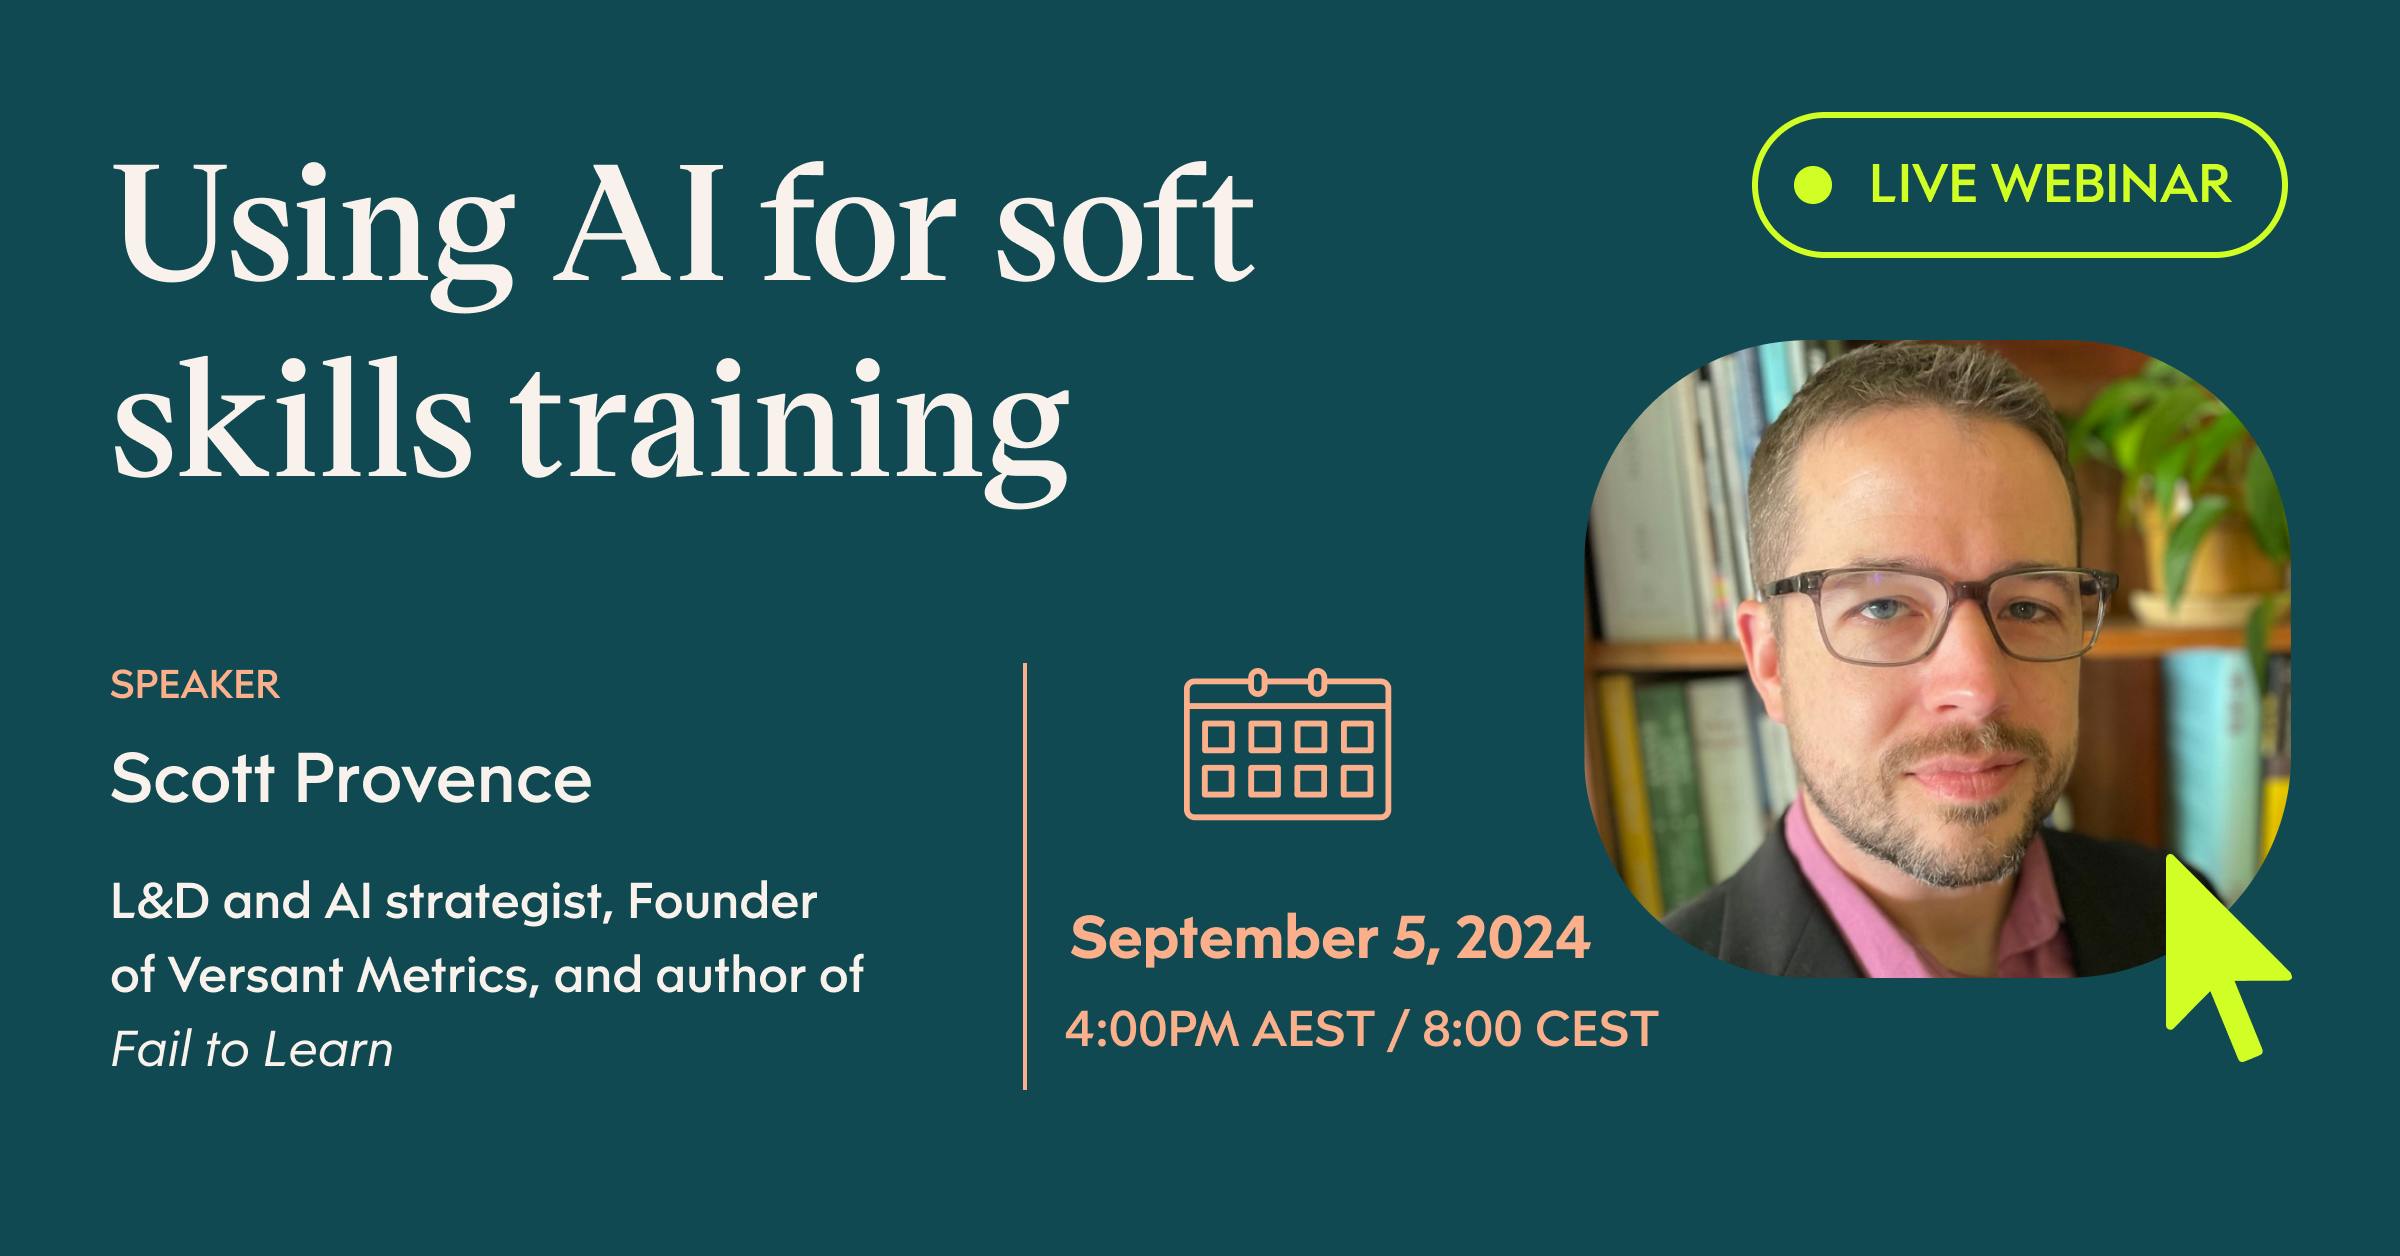 Using AI for soft skills training, September 5 at 4 pm AEST